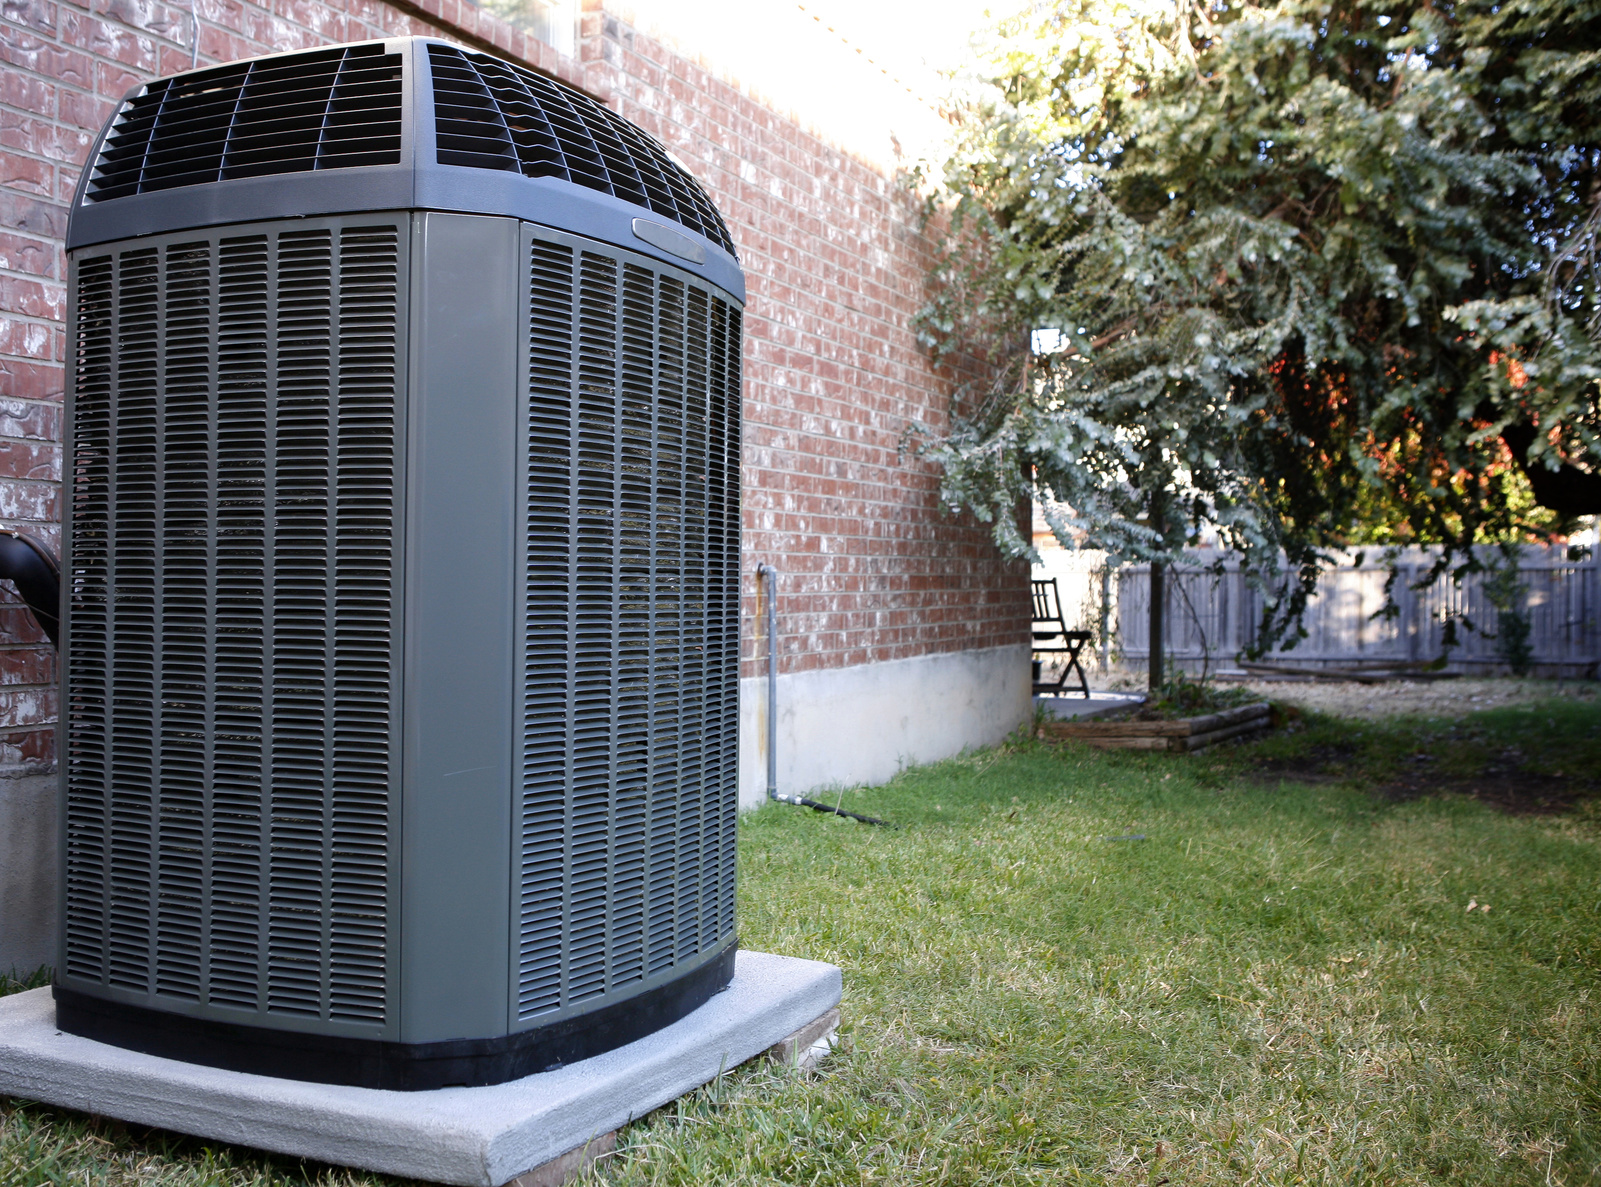 A ducted ASHP outdoor unit.